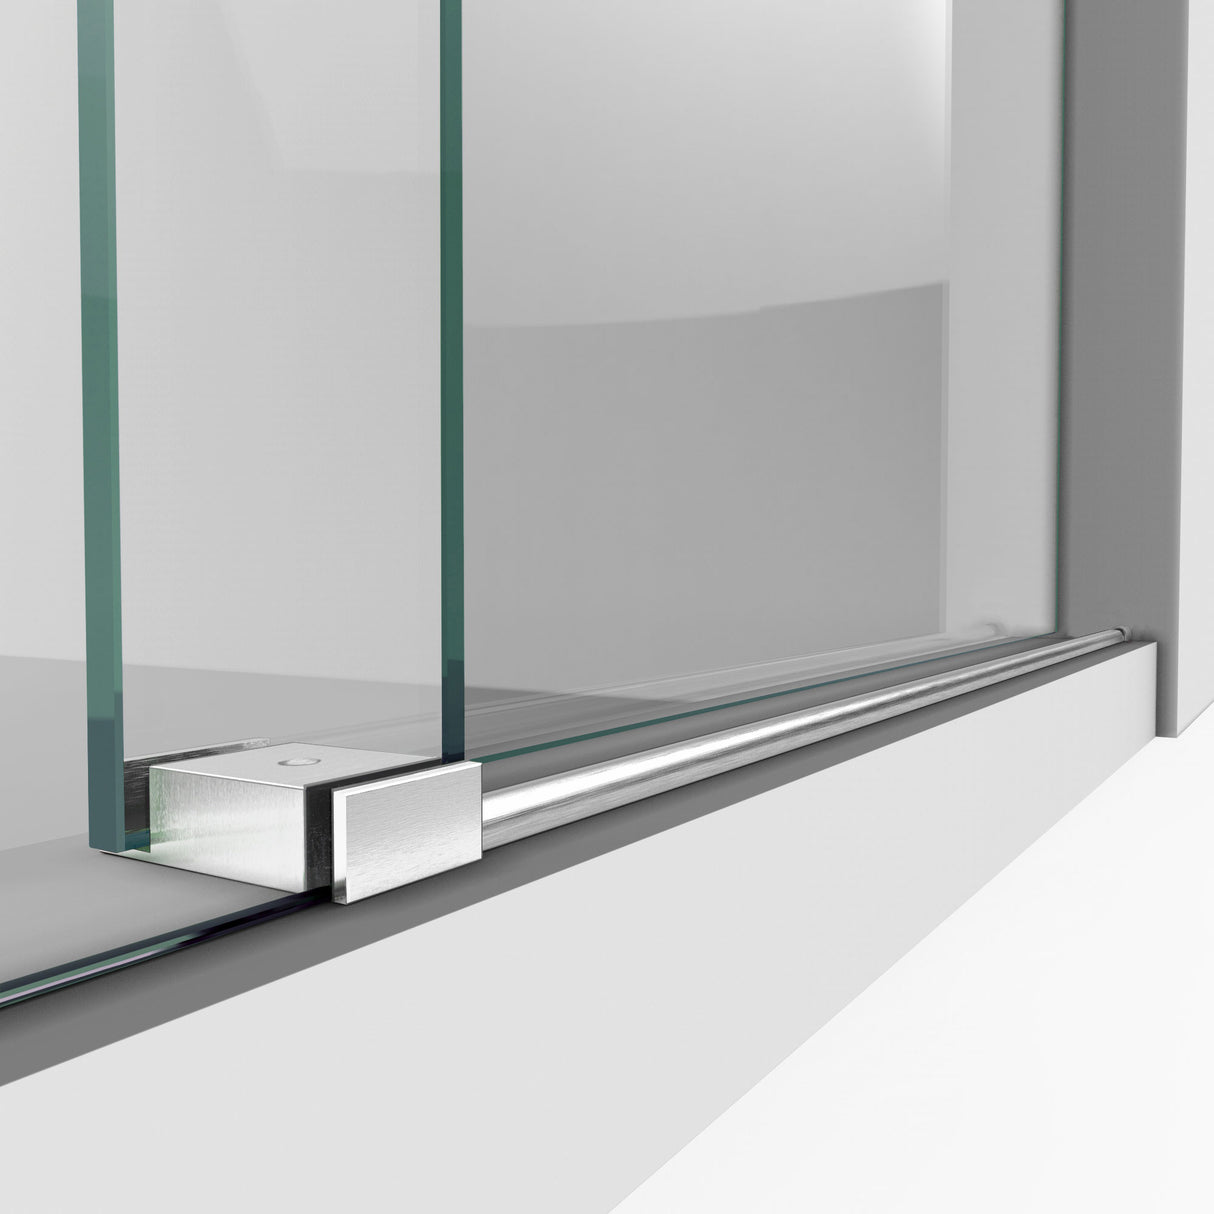 DreamLine Enigma-X 56-60 in. W x 76 in. H Clear Sliding Shower Door in Brushed Stainless Steel